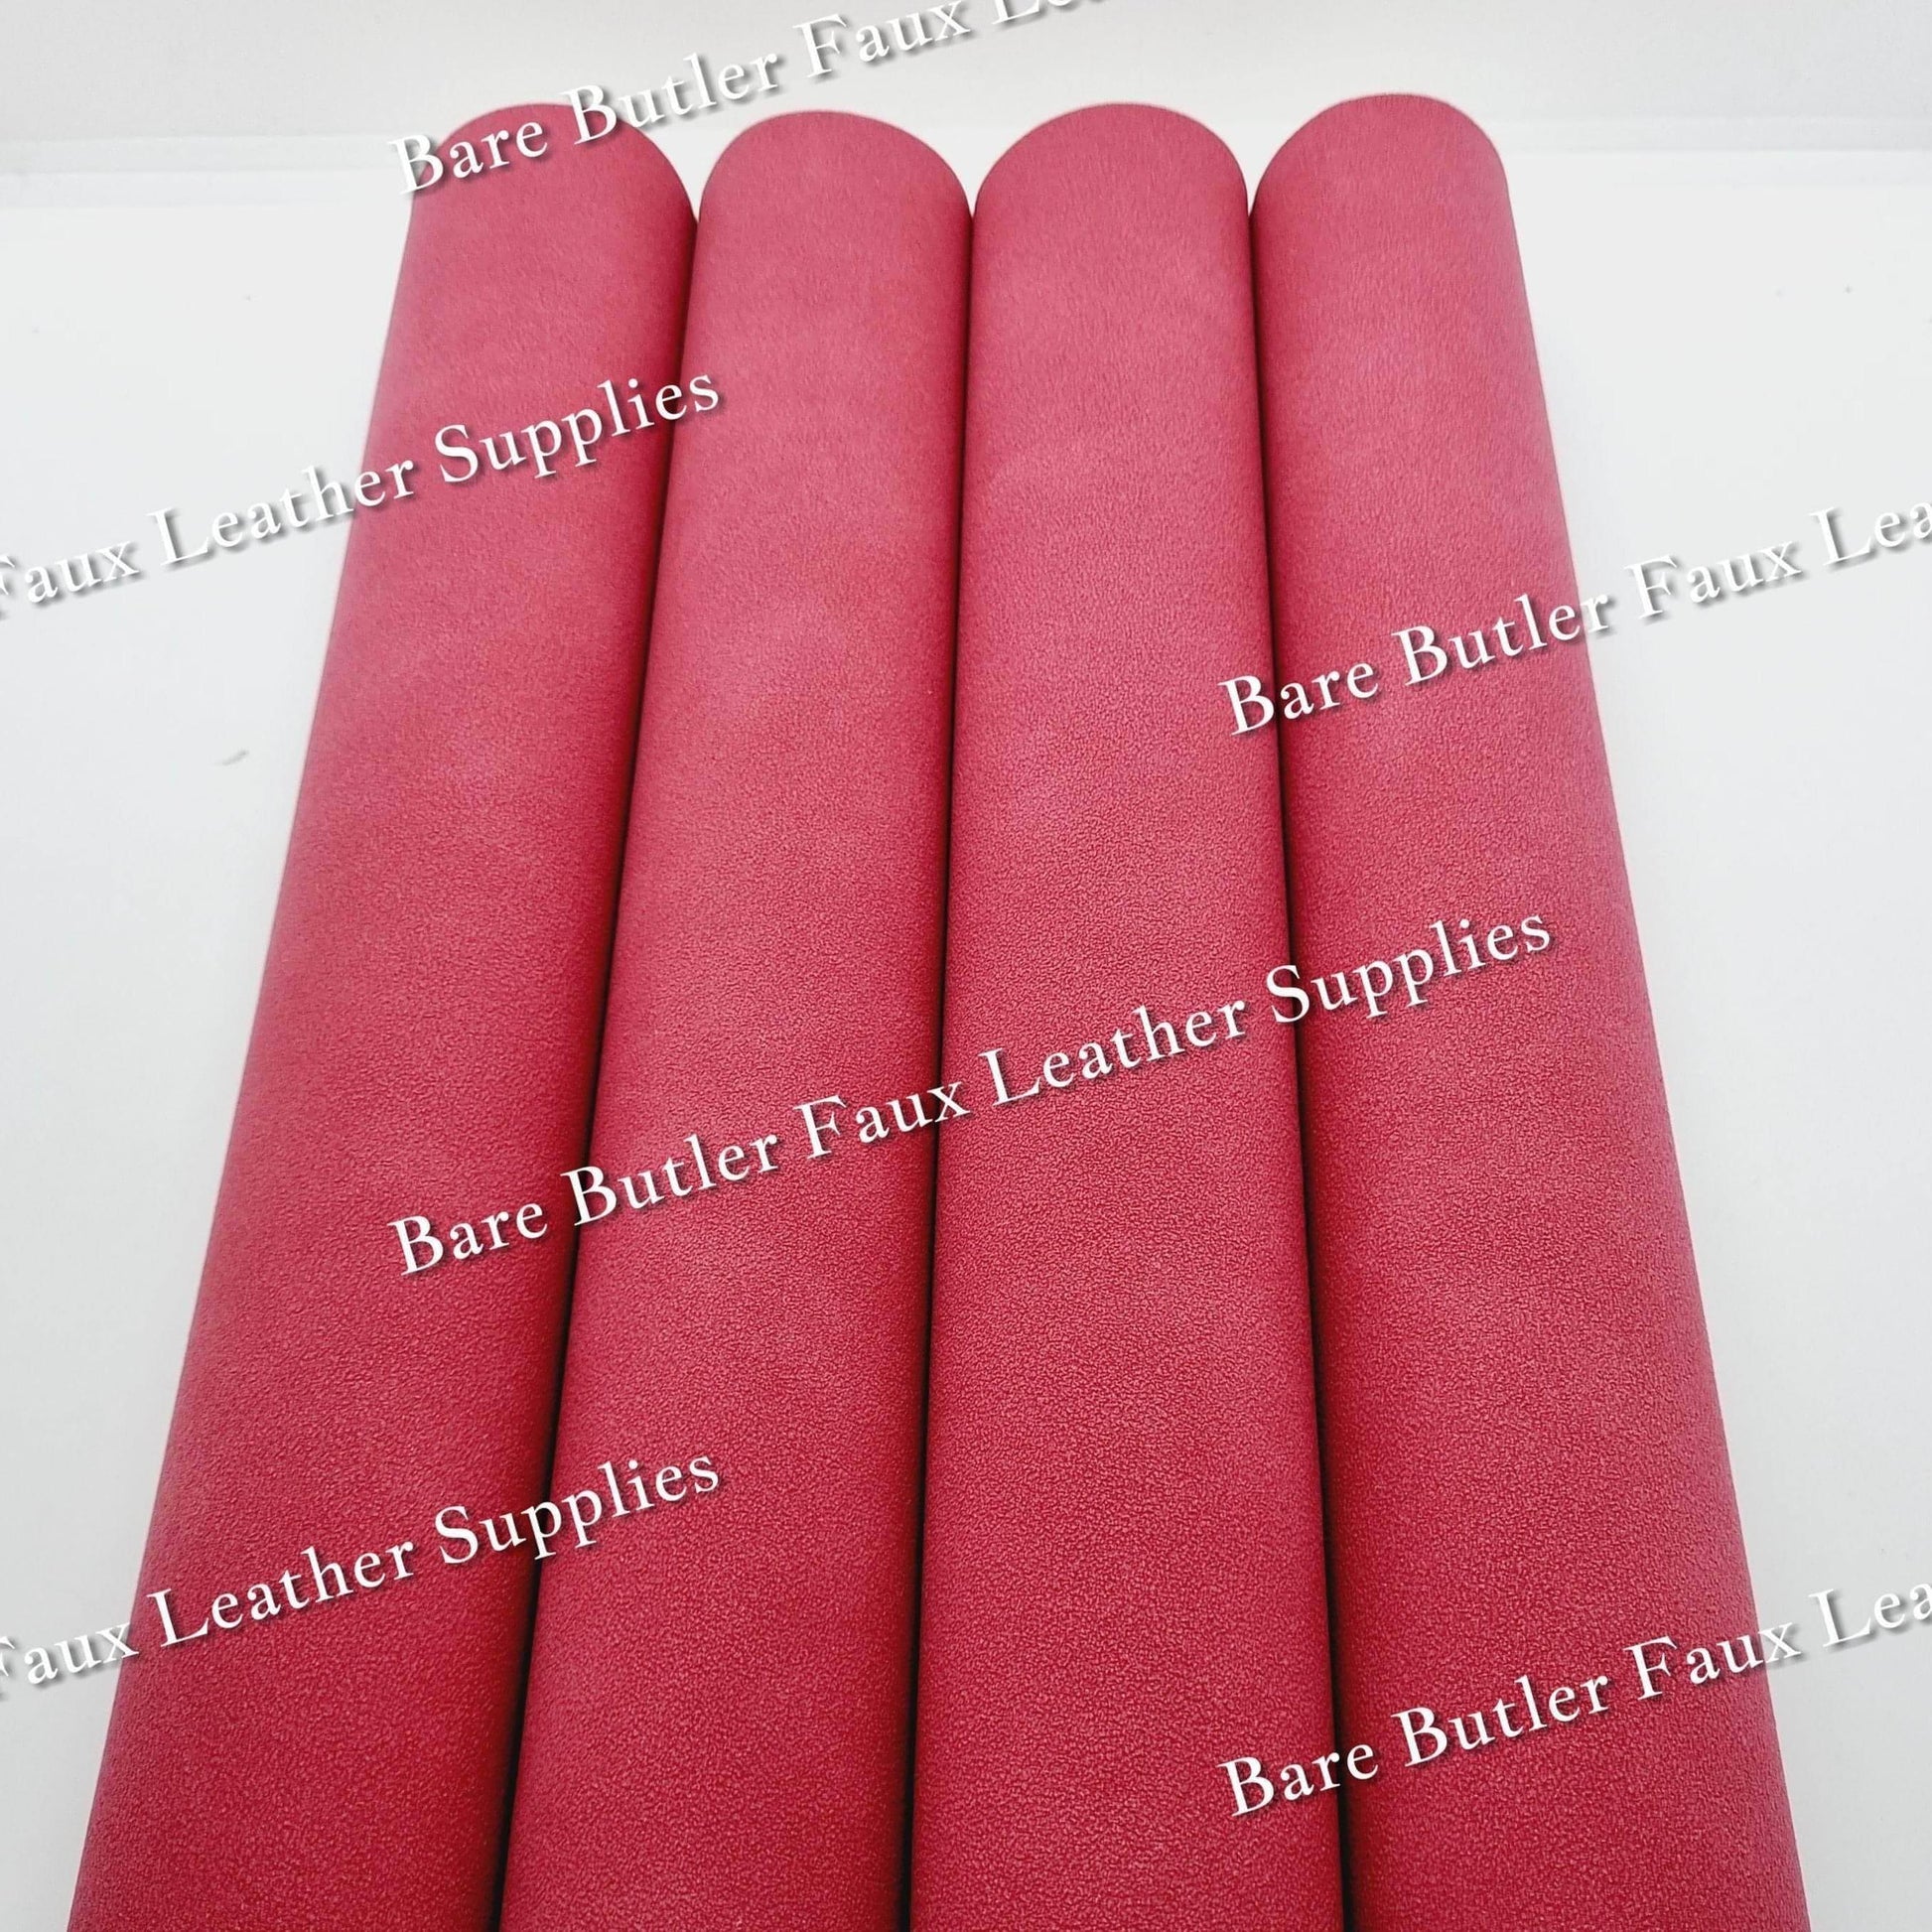 Suede - Berry - Faux, Faux Leather, Suede - Bare Butler Faux Leather Supplies 